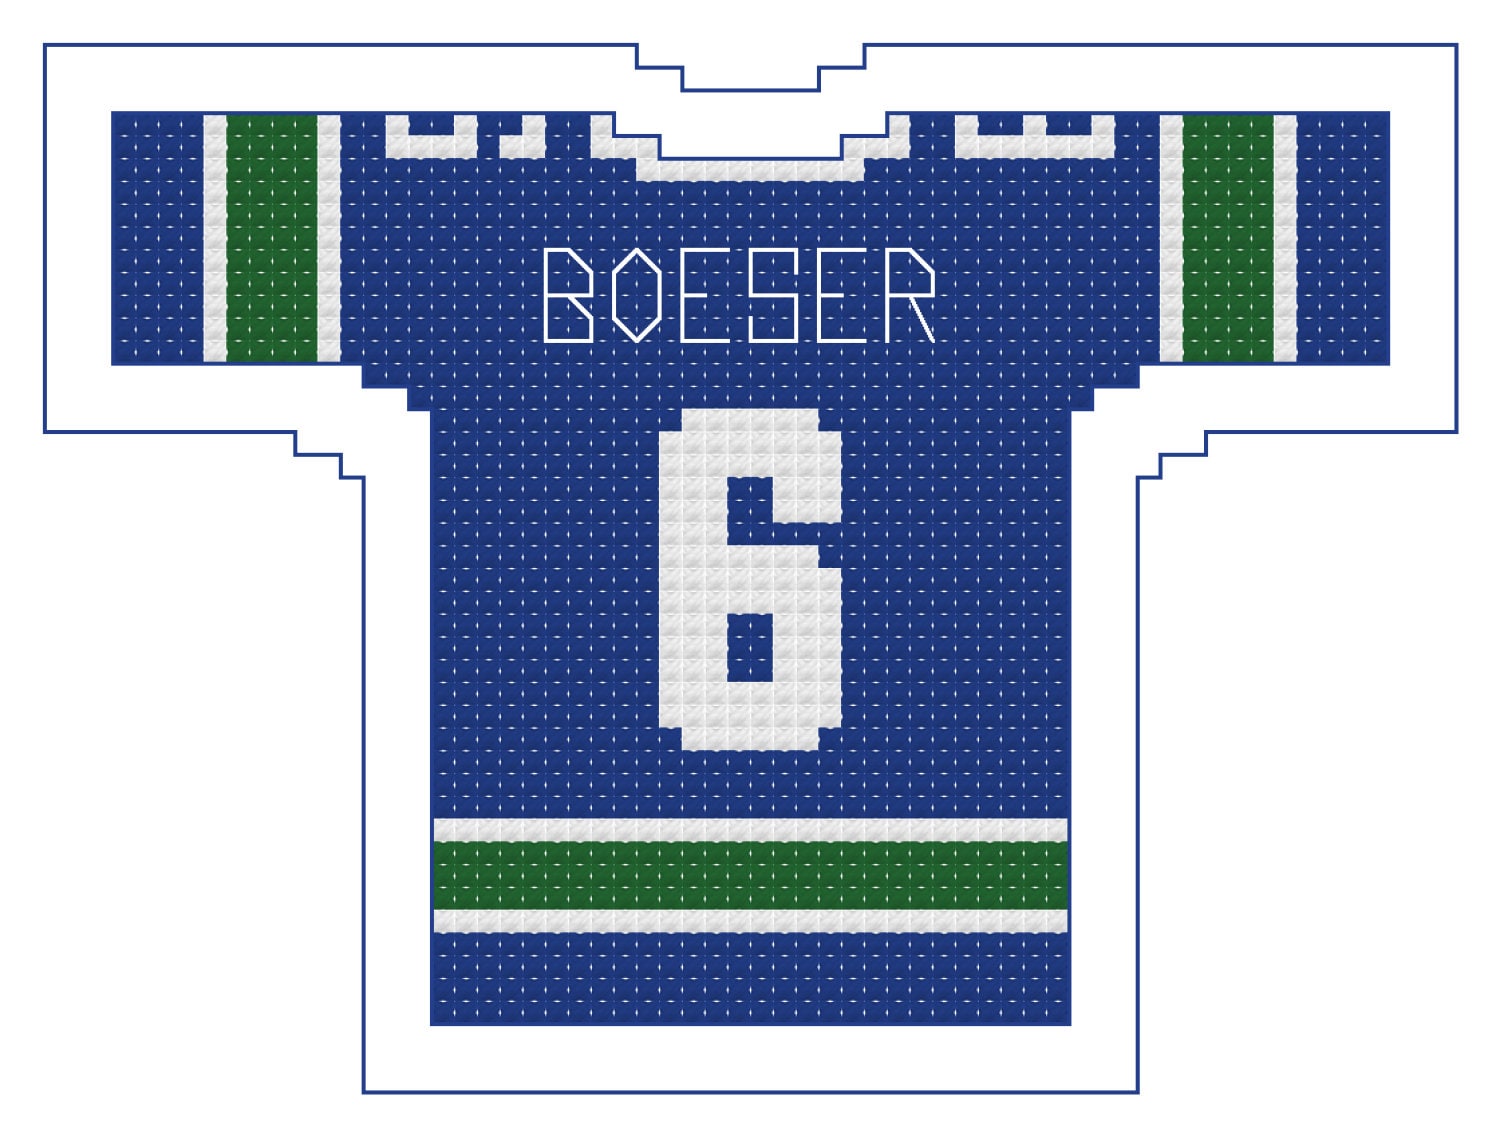 Vancouver Canucks NHL Home Jersey